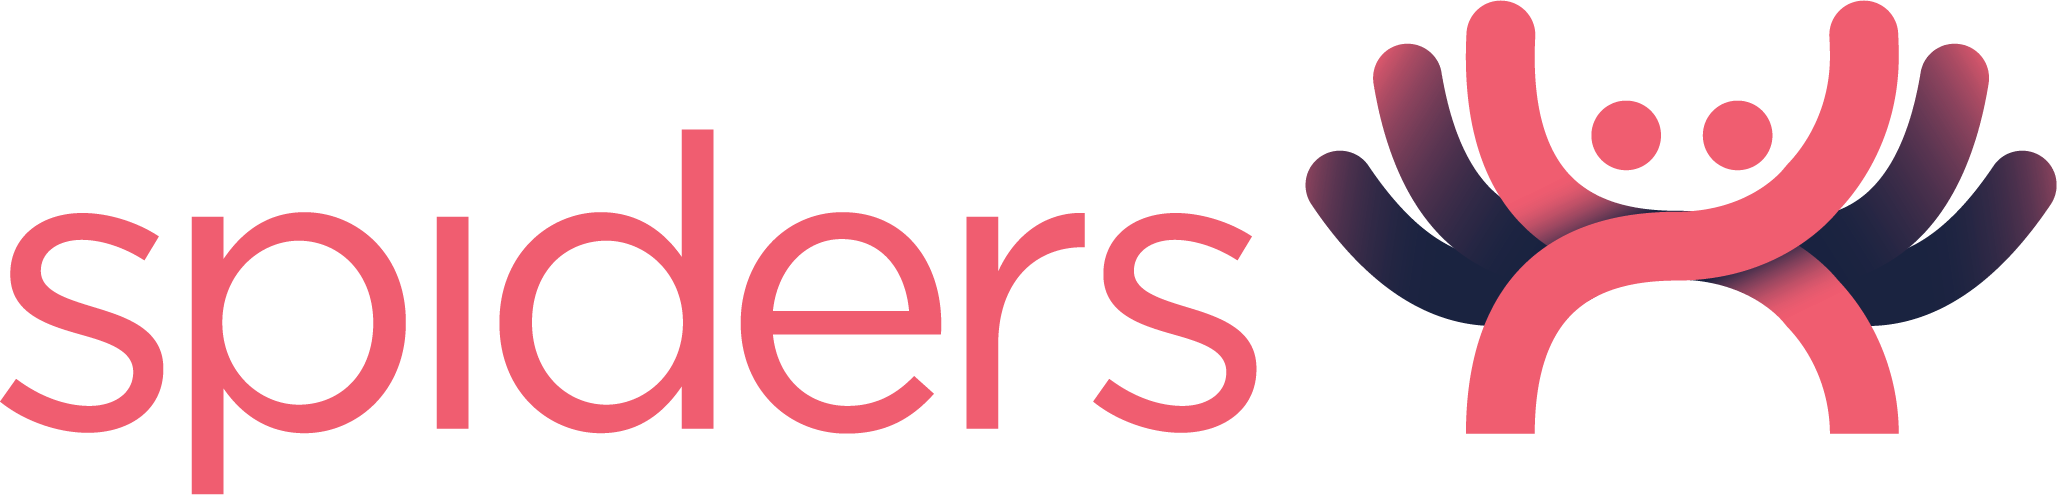 Pink Spider Logo - 2018 The Spiders – The Digital Technology Awards